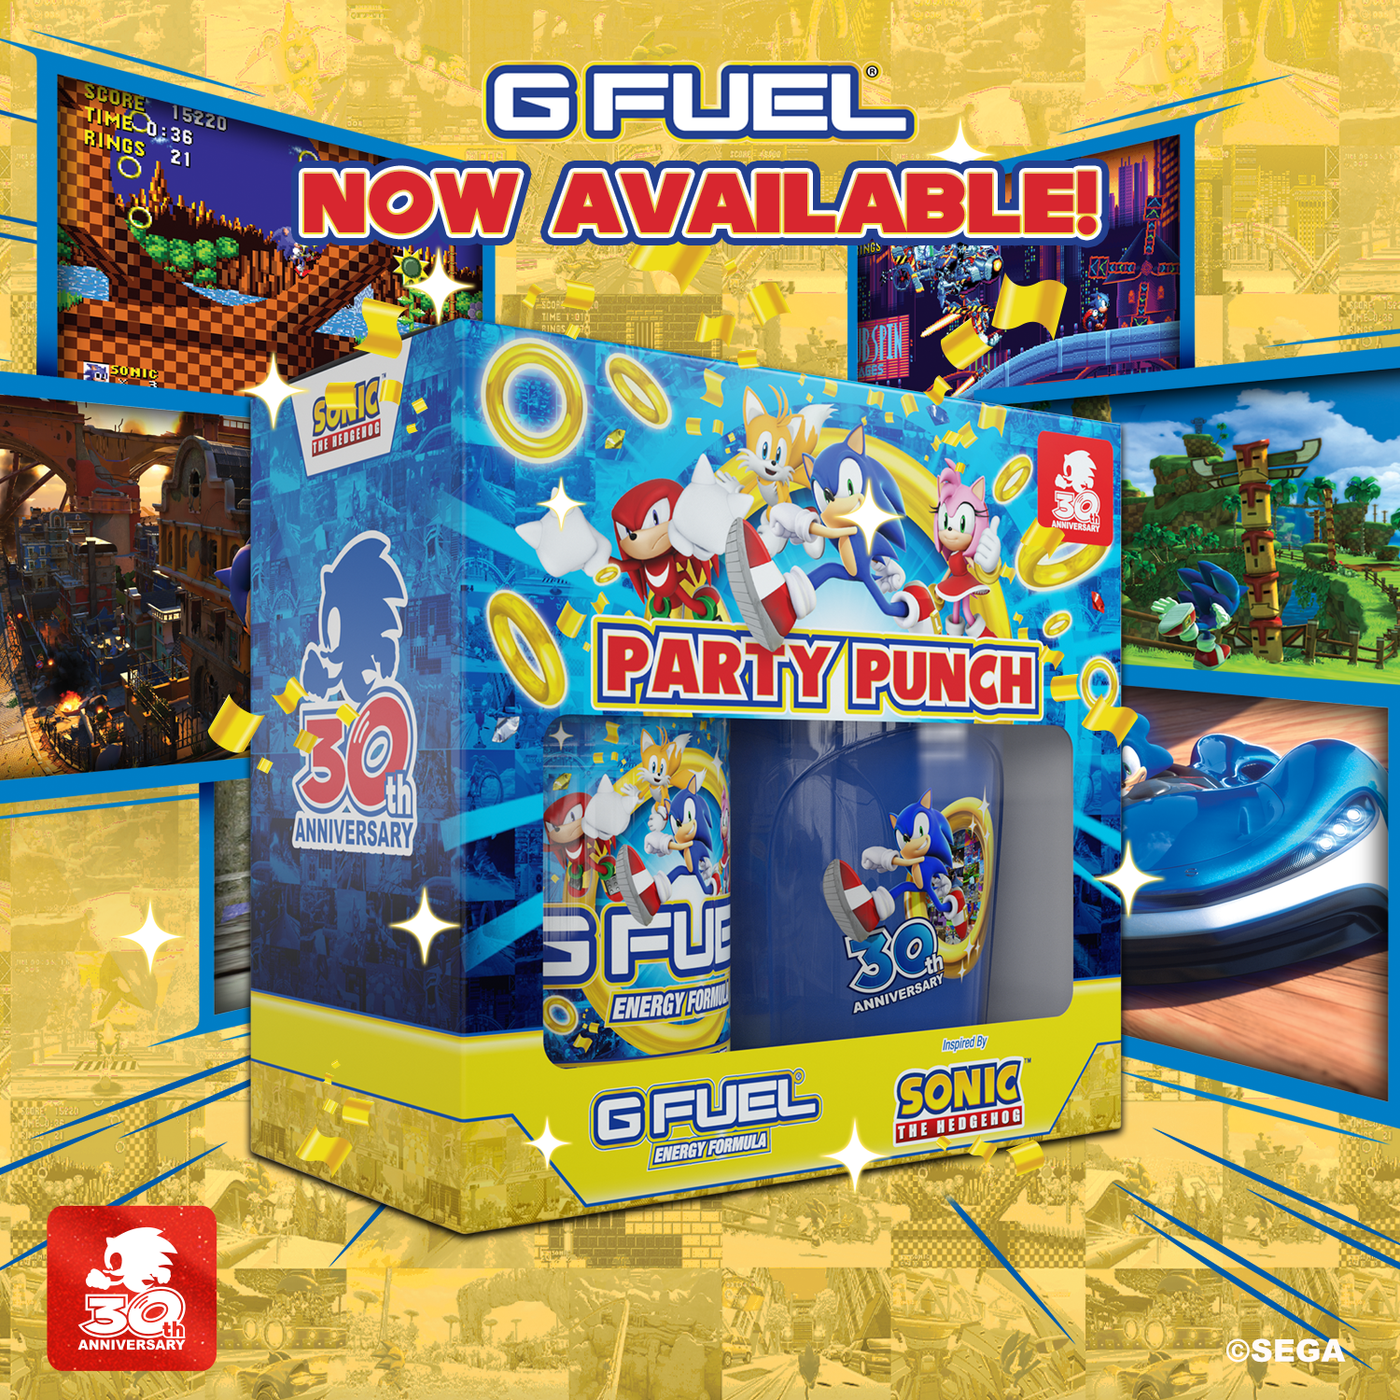 G FUEL Party Punch Collector's Box, created in celebration of Sonic the Hedgehog’s 30th anniversary and inspired by the Sweet Mountain stage in Sonic Colors: Ultimate™, is now available at gfuel.com.